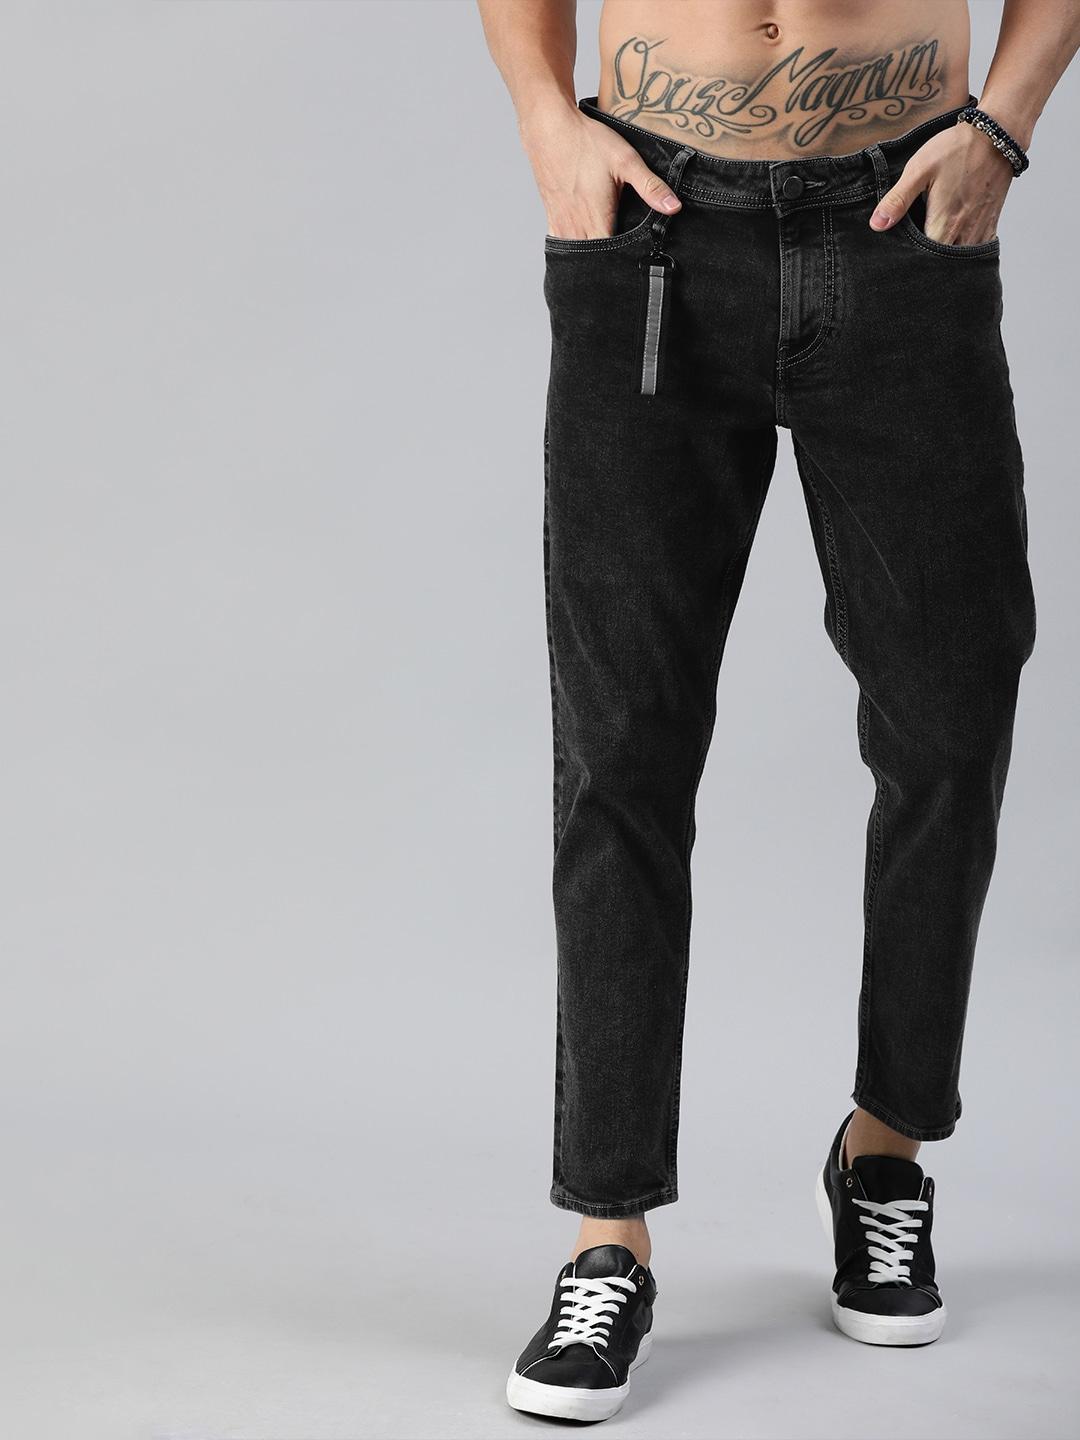 roadster-men-black-tapered-fit-mid-rise-clean-look-stretchable-jeans